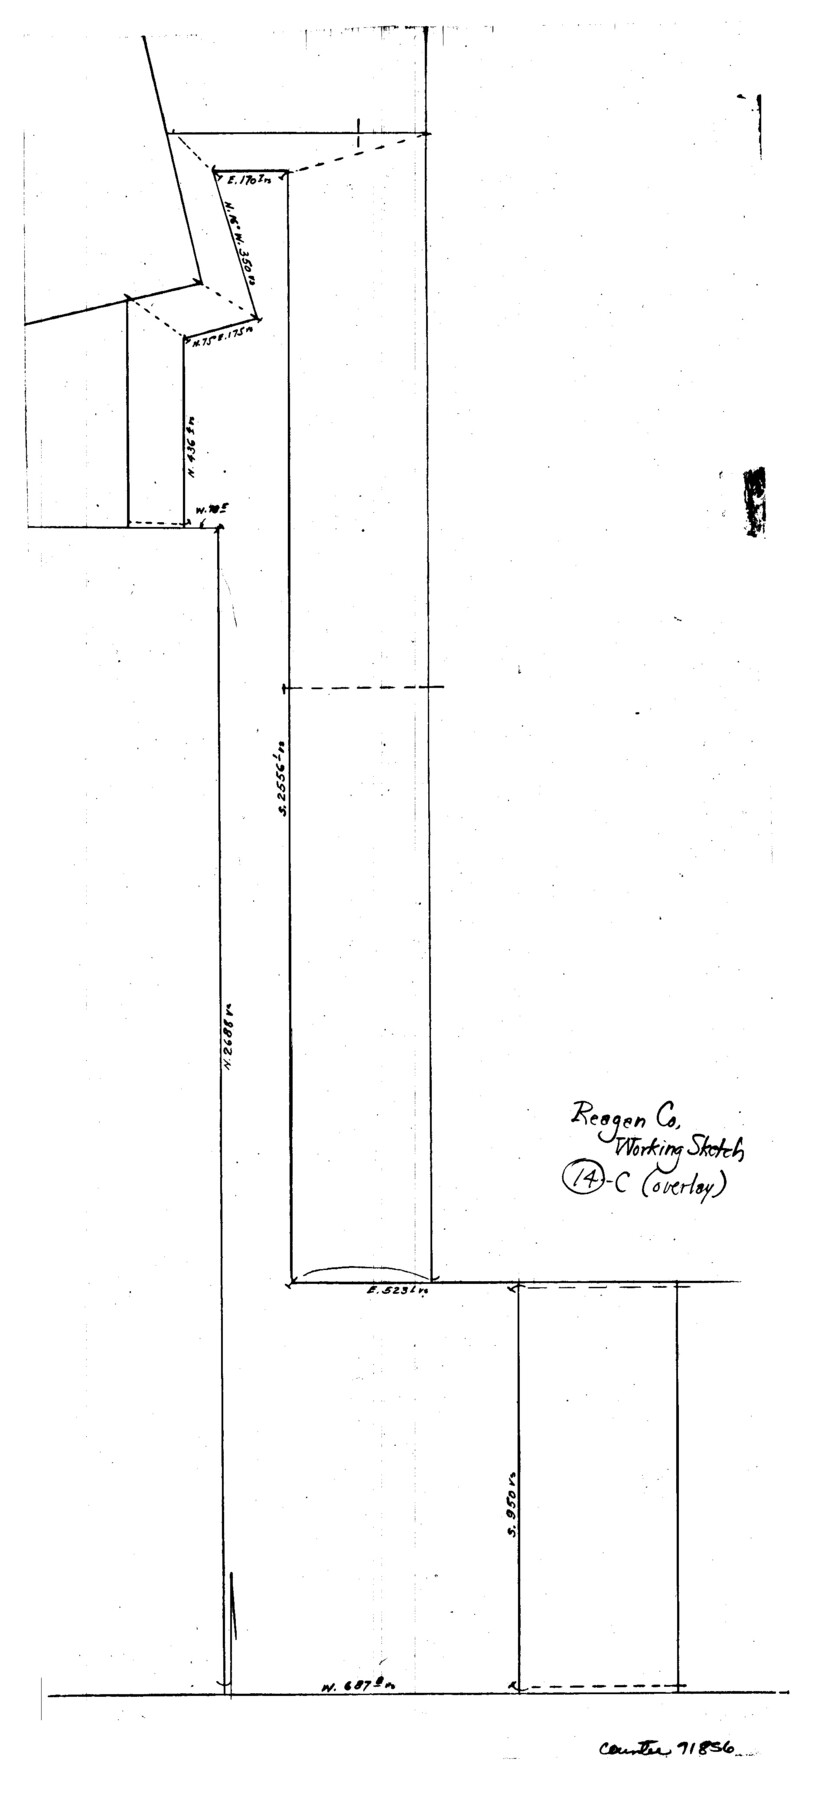 71856, Reagan County Working Sketch 14c, General Map Collection